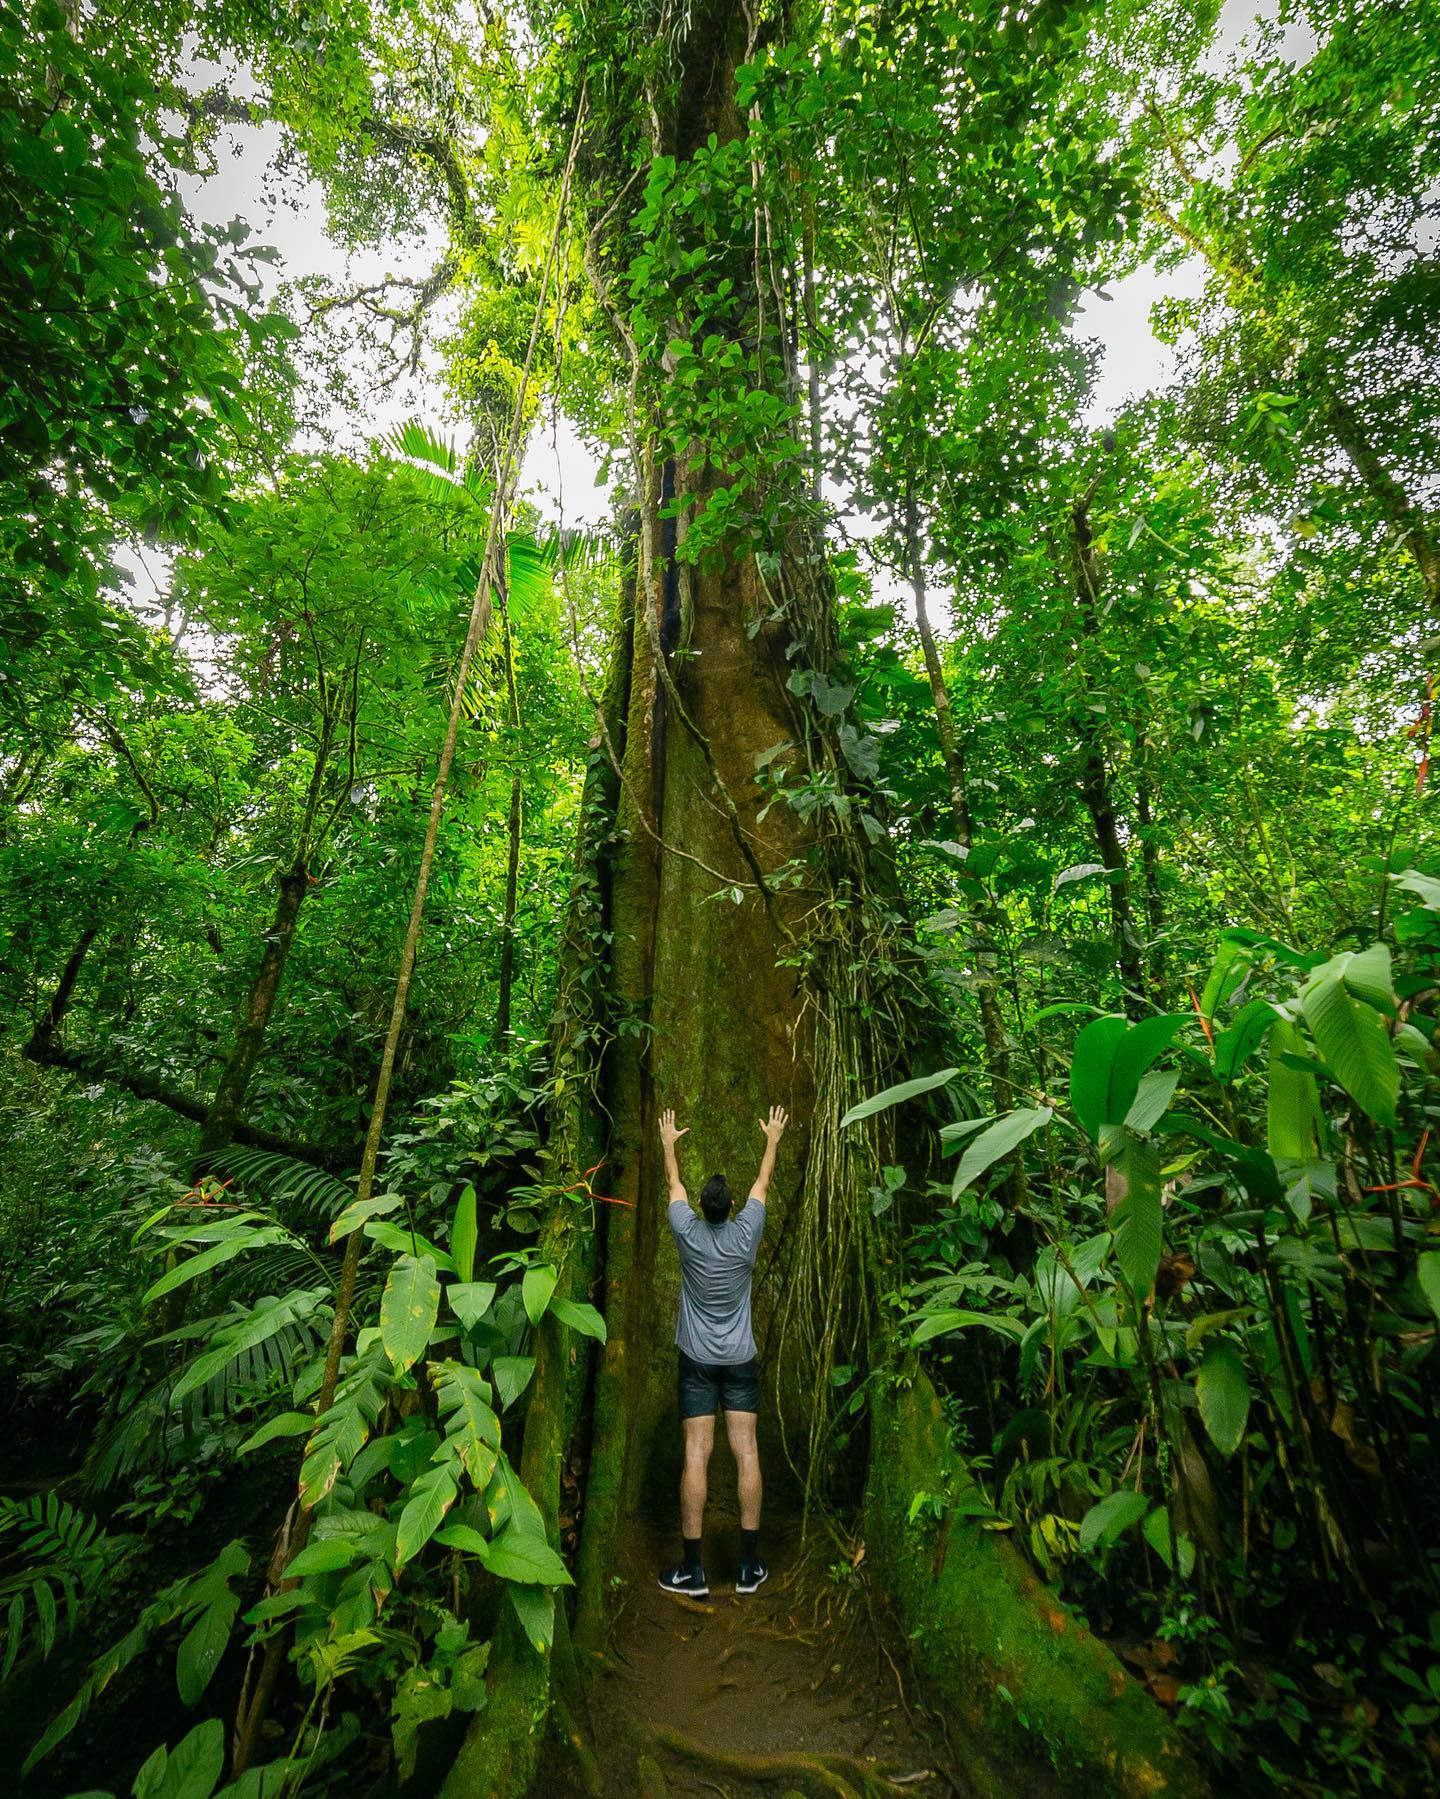 “Thank you for a beautiful experience with Nature!”
.
Discover the essence of the tropical rainforest next to the centenary trees that stand along our pristine trails.
.
Reserve your visit today at www.sensoria.cr or via WhatsApp at +506 8955-4971.
.
#experiencesensoria
.
#costarica #visitcostarica #sustainabletravel #sustainability #tropical #rainforest #jungle #sustainabletourism #hiking #thisiscostarica #sensoria  #travel #luxury #costarica #thermalpools #wellness #wellnestravel